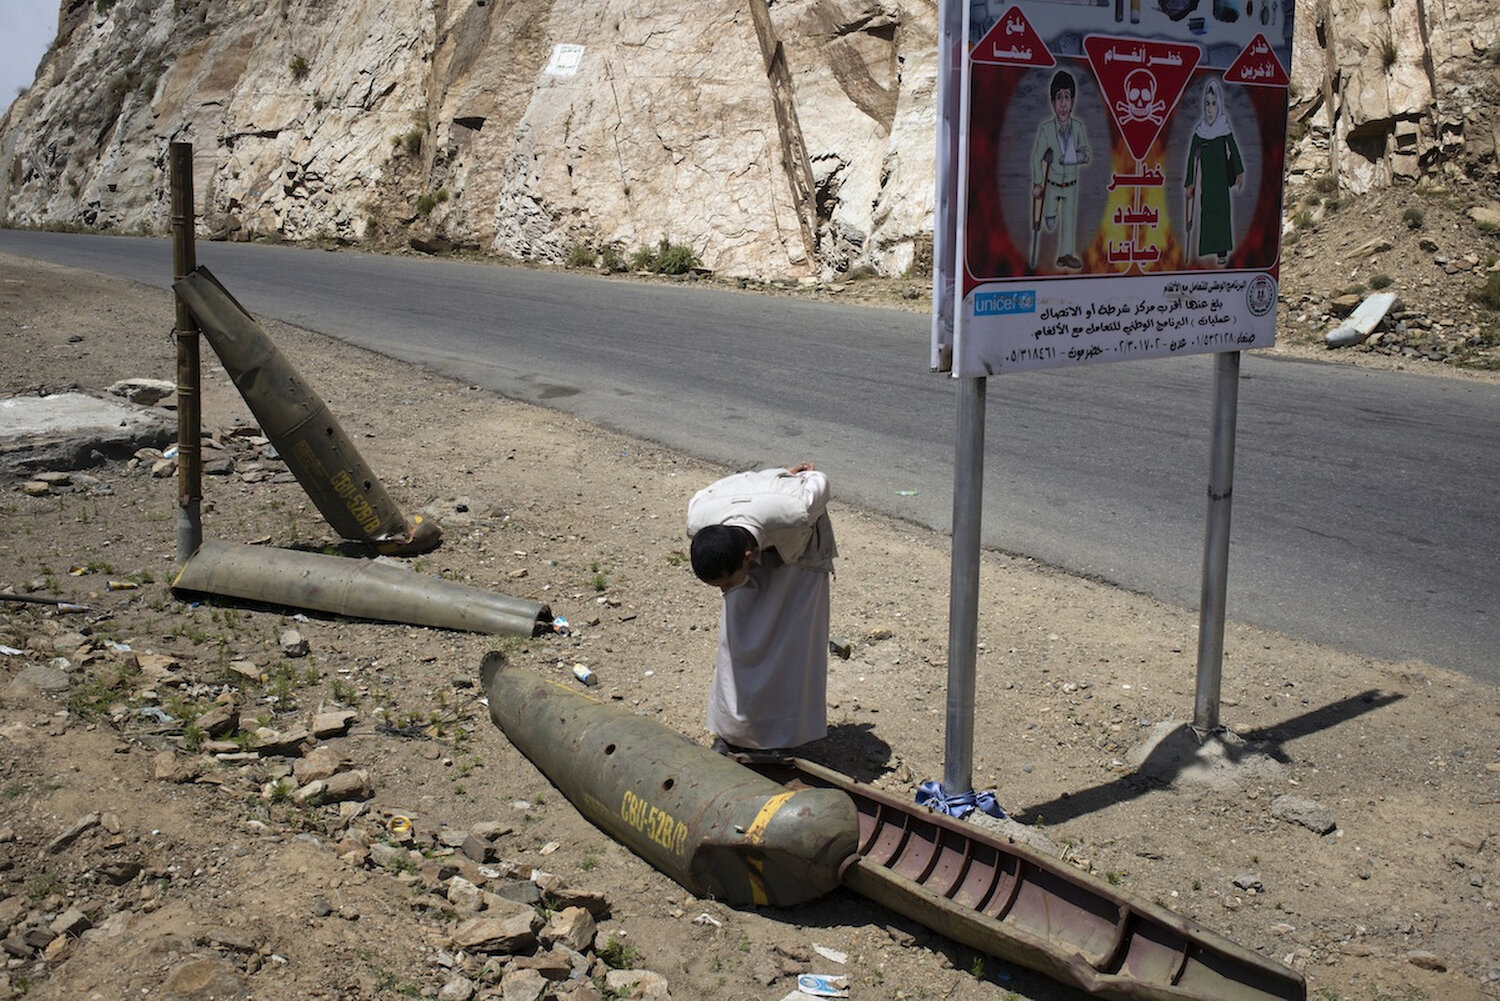  A Houthi supporter looks at the shell of an American-made cluster bomb, many of which still litter the slopes of Saada from the previous wars. 